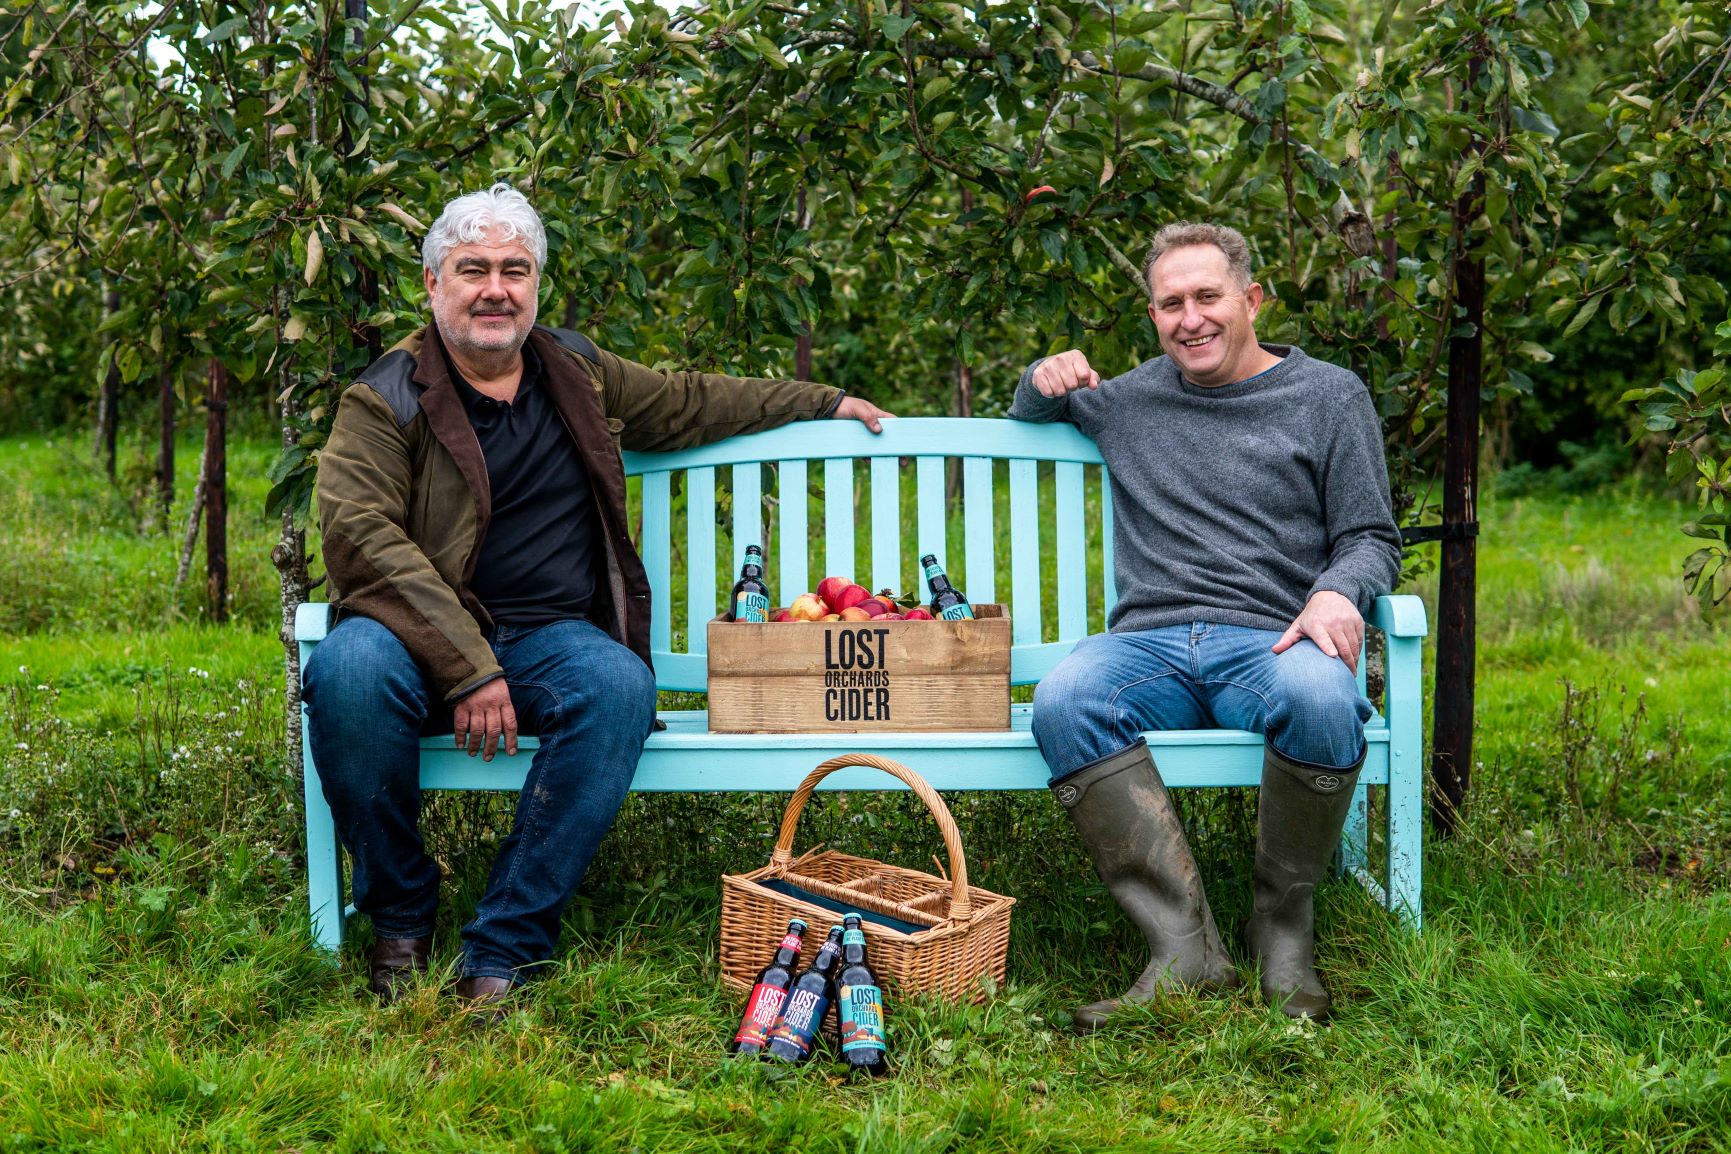 https://wpcluster.dctdigital.com/thecourier/wp-content/uploads/sites/12/2020/05/Lost-Orchards-two-founders-Angus-Morrison-and-Andy-Husband.jpg